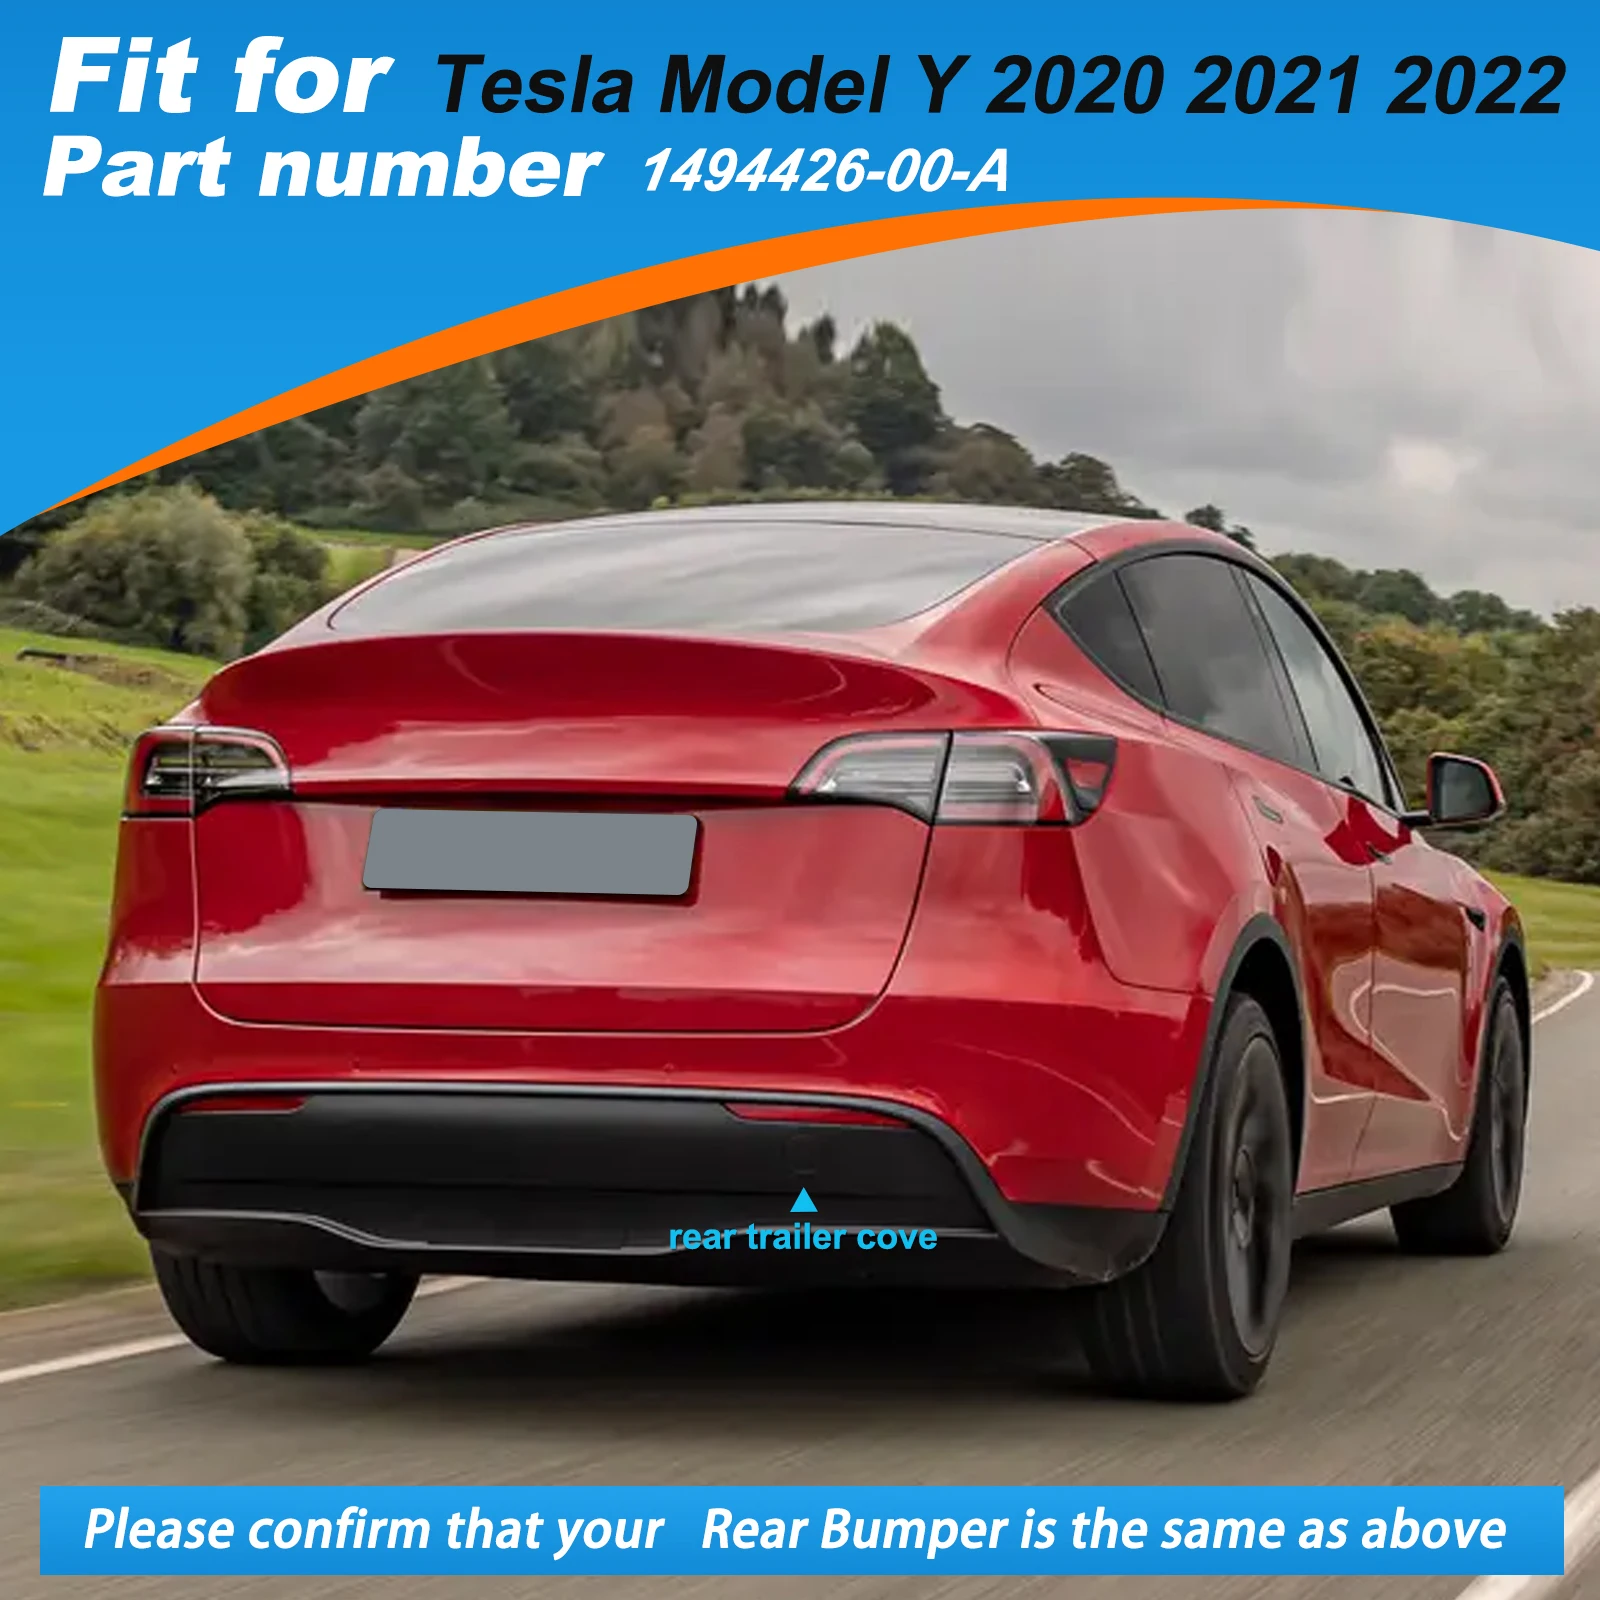 Rear Bumper Tow Hook Cover Cap Towing Eye For Tesla Model Y Accessories  2020 2021 2022 1494426-00-A 149442600A